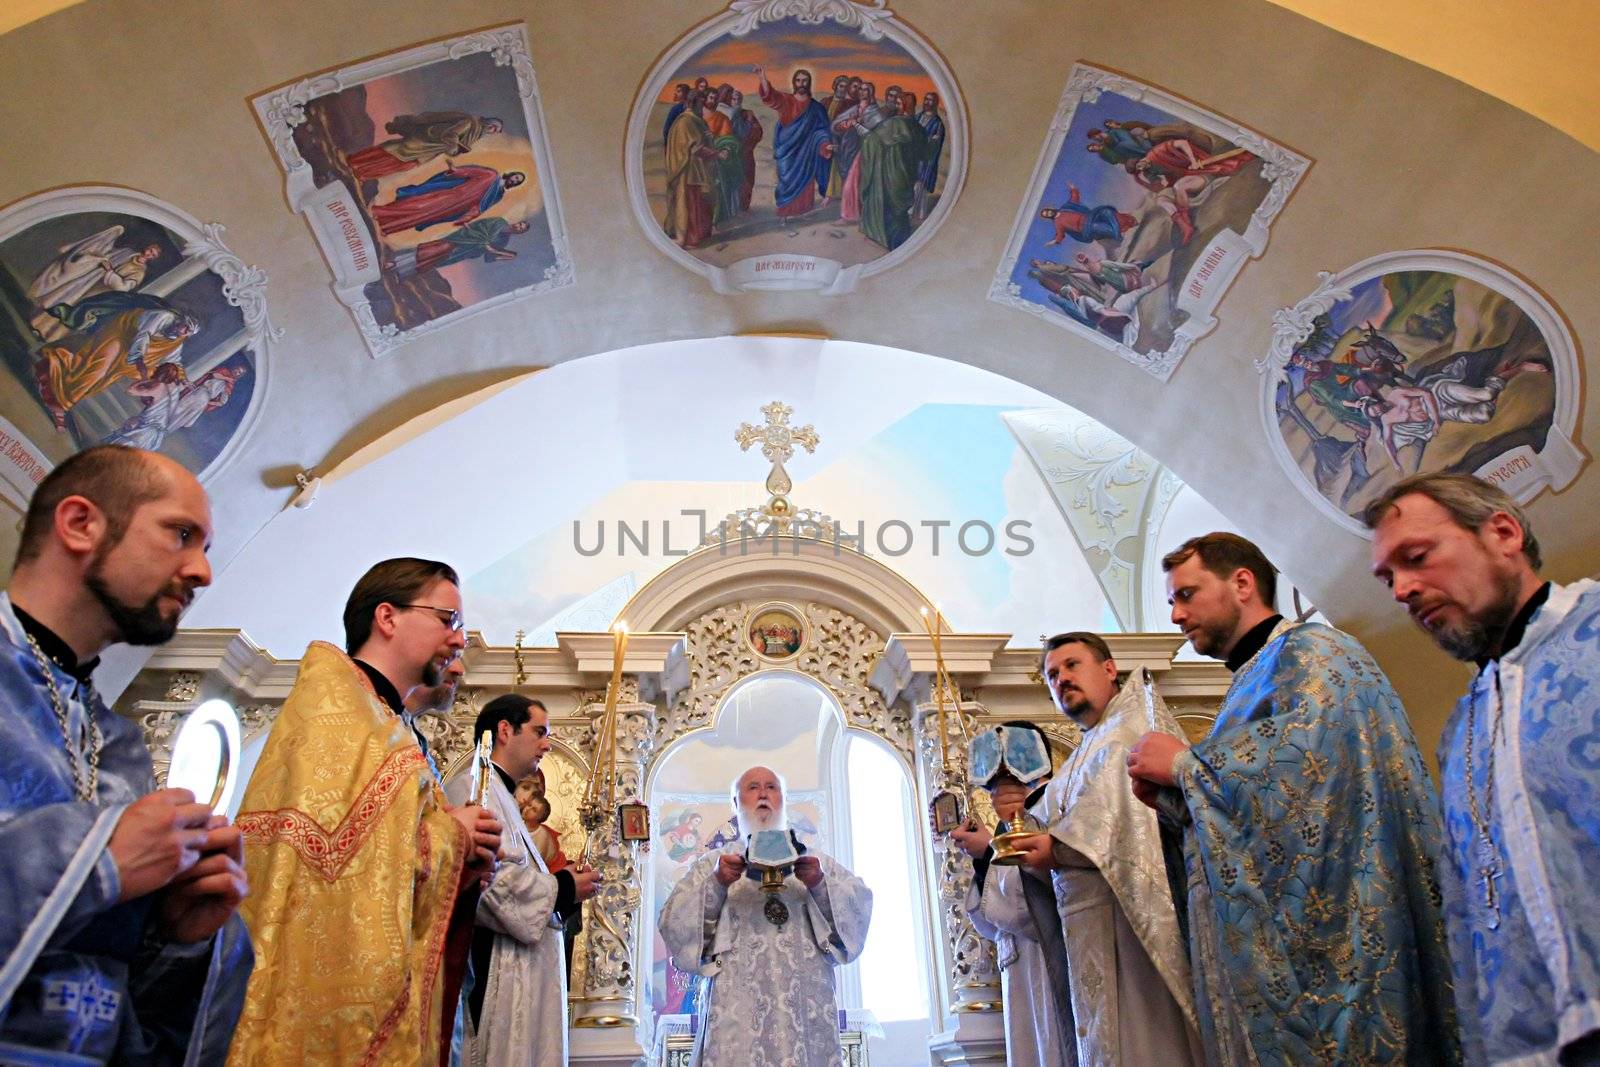 KYIV, UKRAINE - JUNE 12: The Holy Spirit Church located at the territory of Kyiv-Mohyla Academy hosted blessing ceremony on the eve of the Pentecost on June 12, 2008 in Kyiv, Ukraine